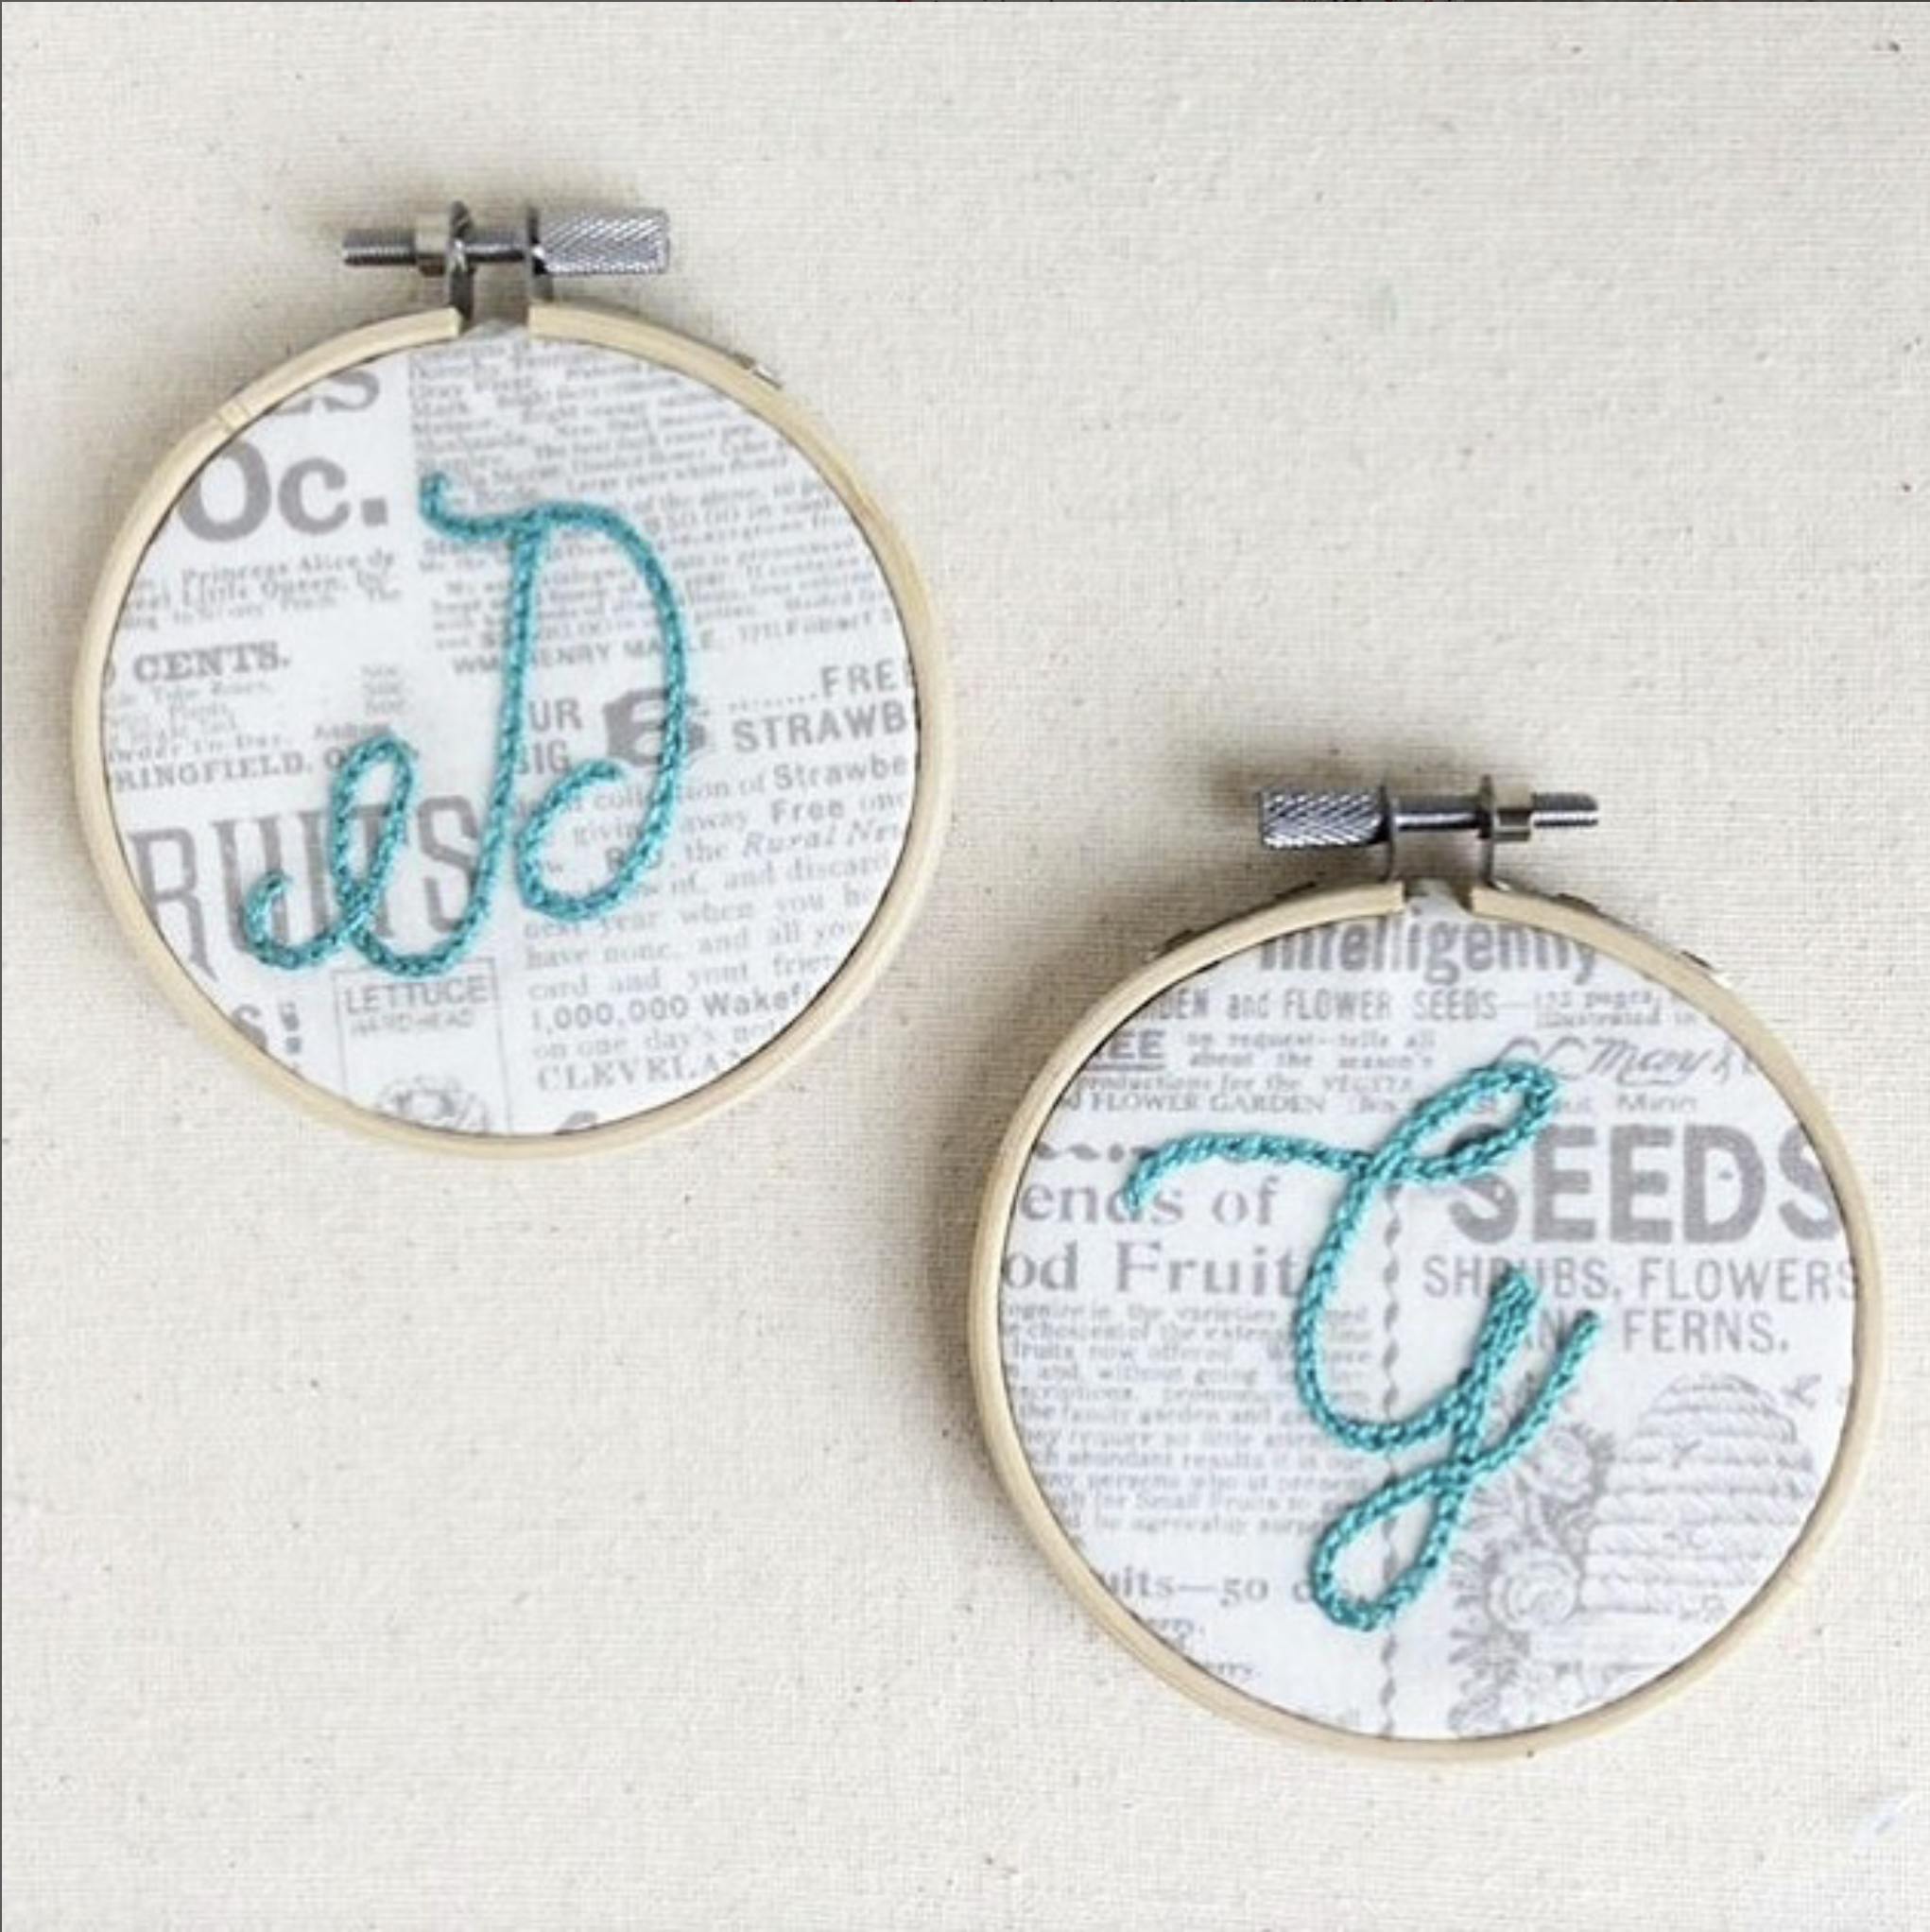 Embroidered Hoop Ornament - quick gift to sew